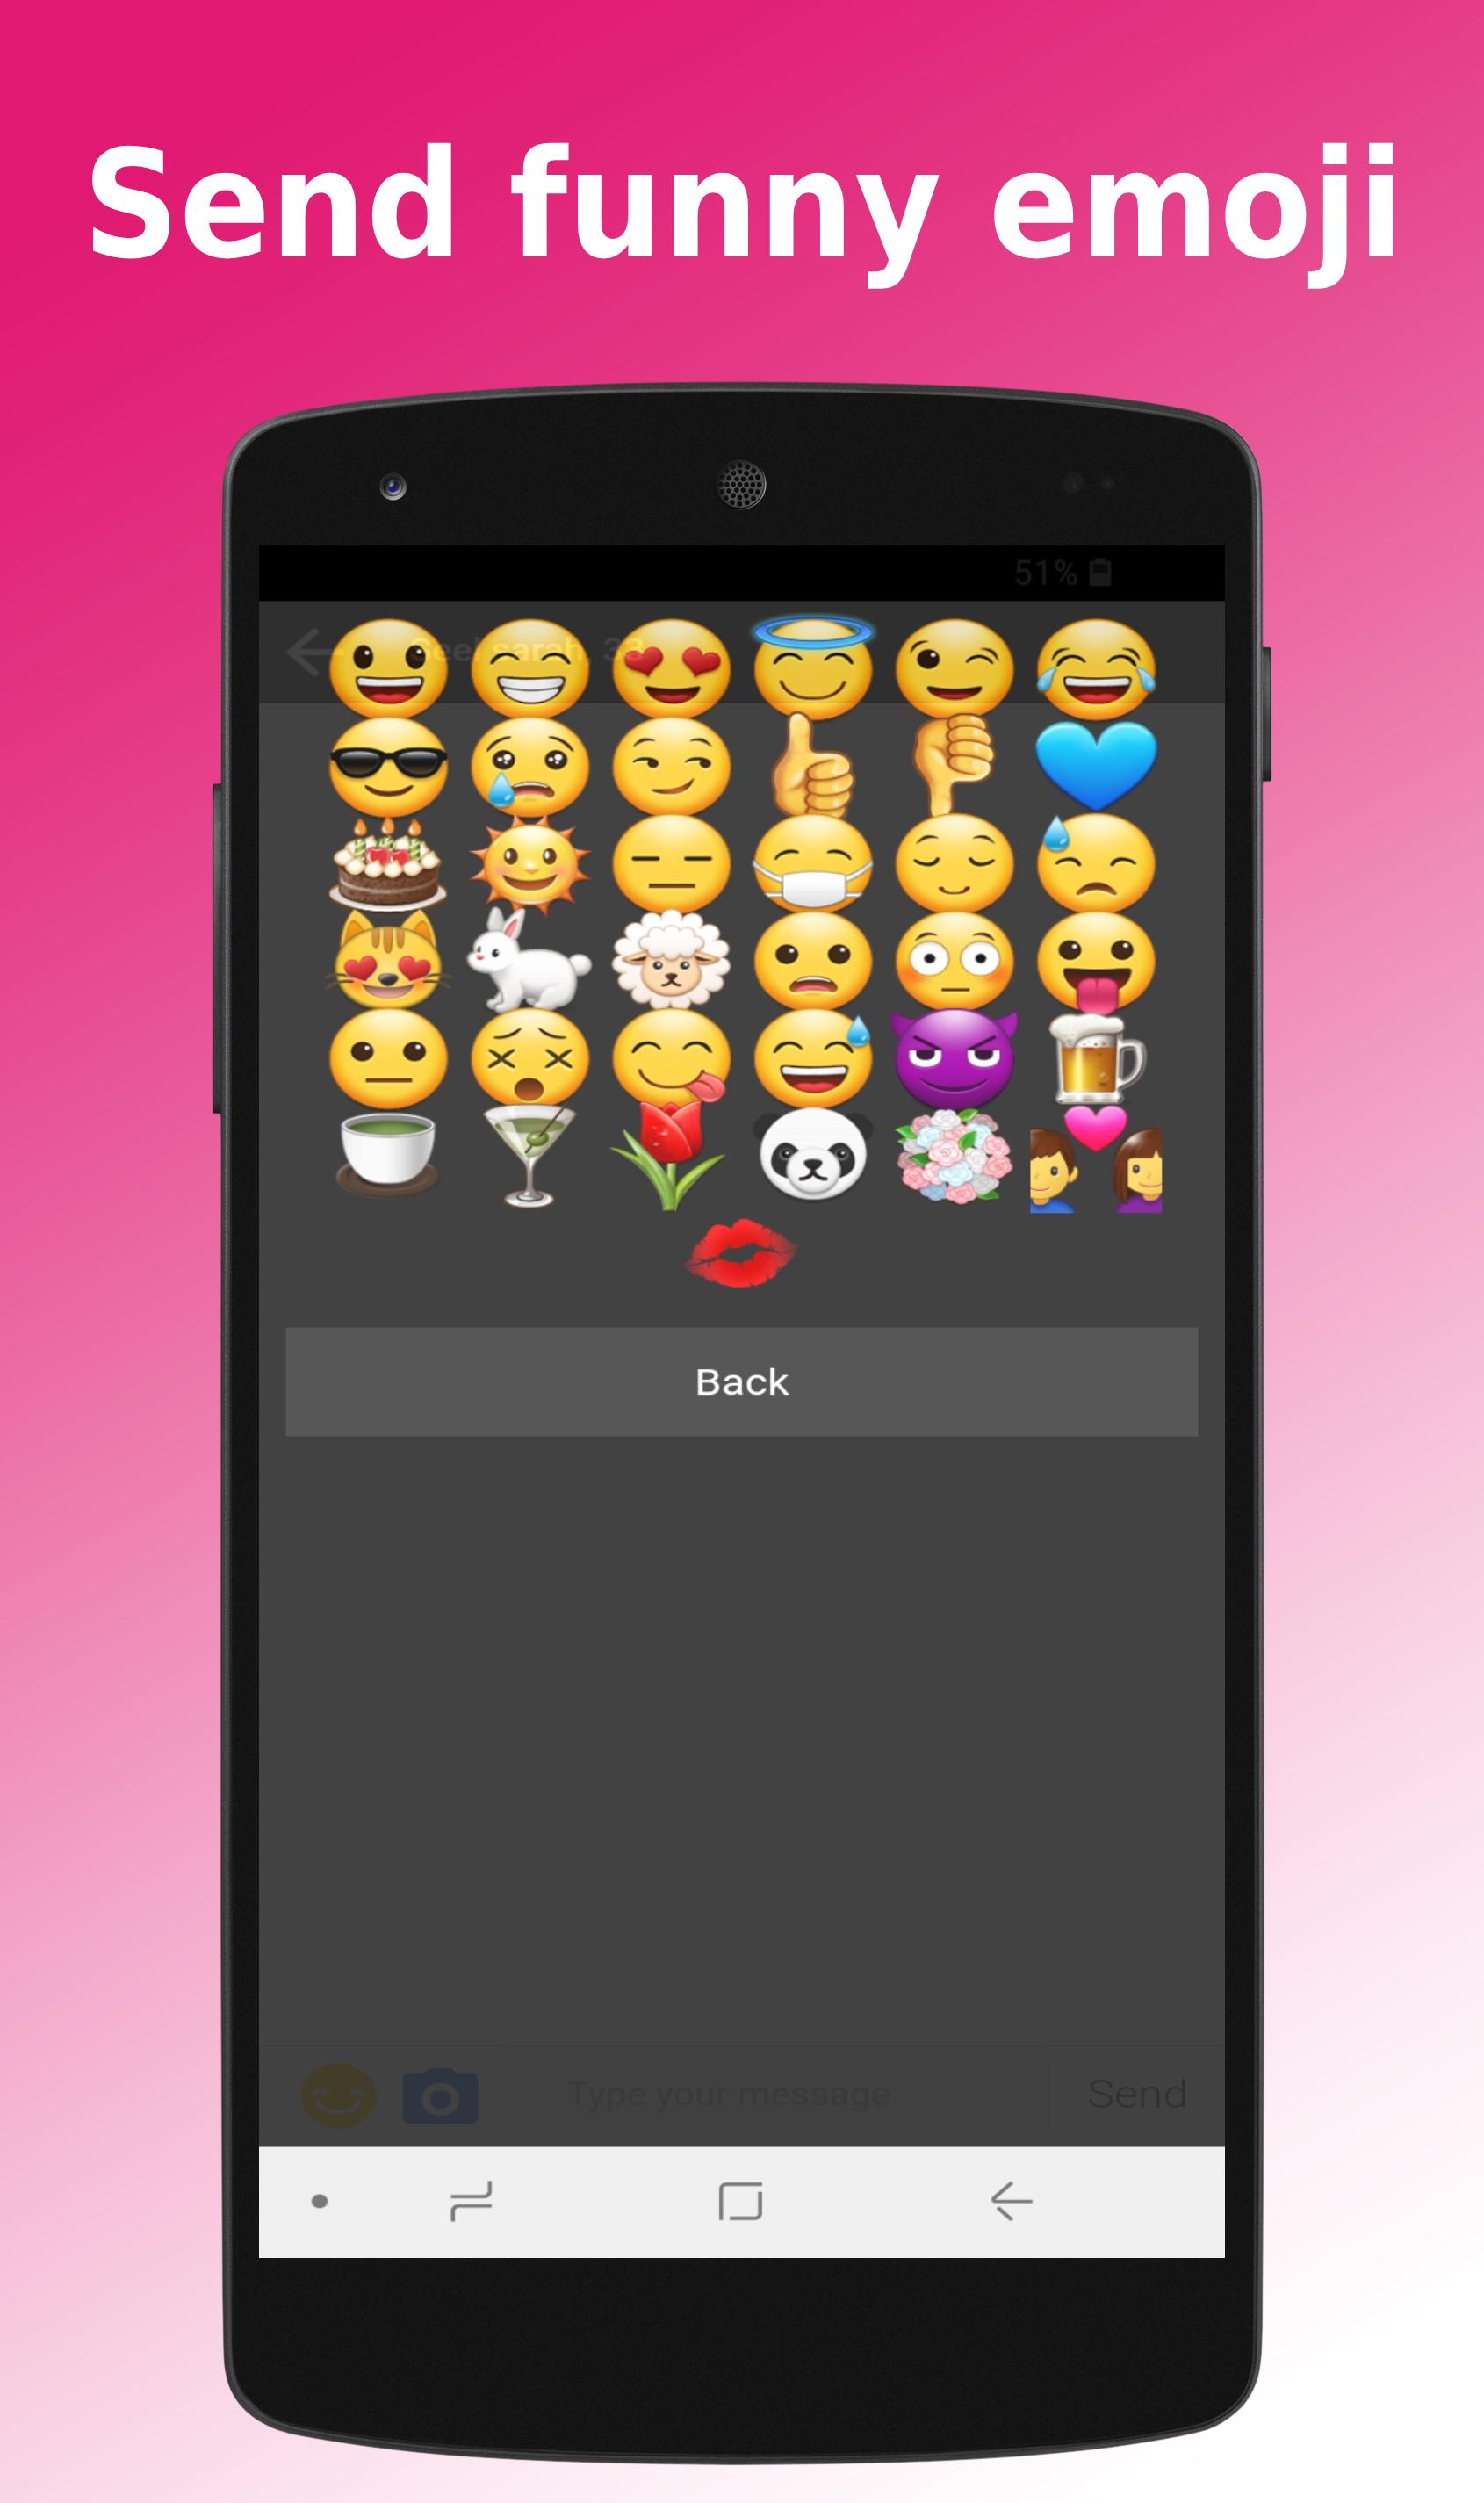 Online Dating Site & Free CHAT for Android - APK Download